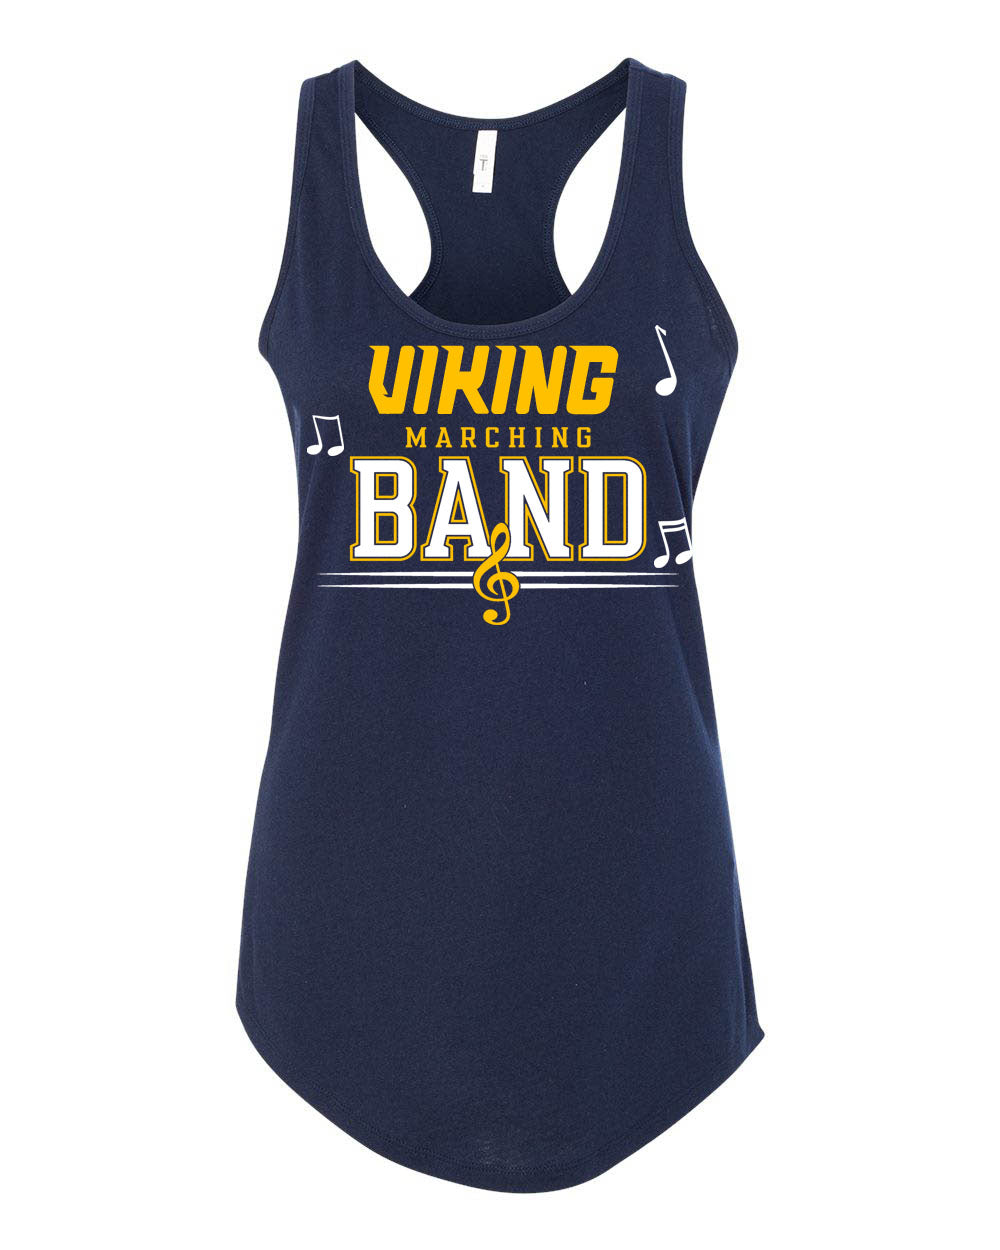 Vernon Marching Band Design 5 Tank Top